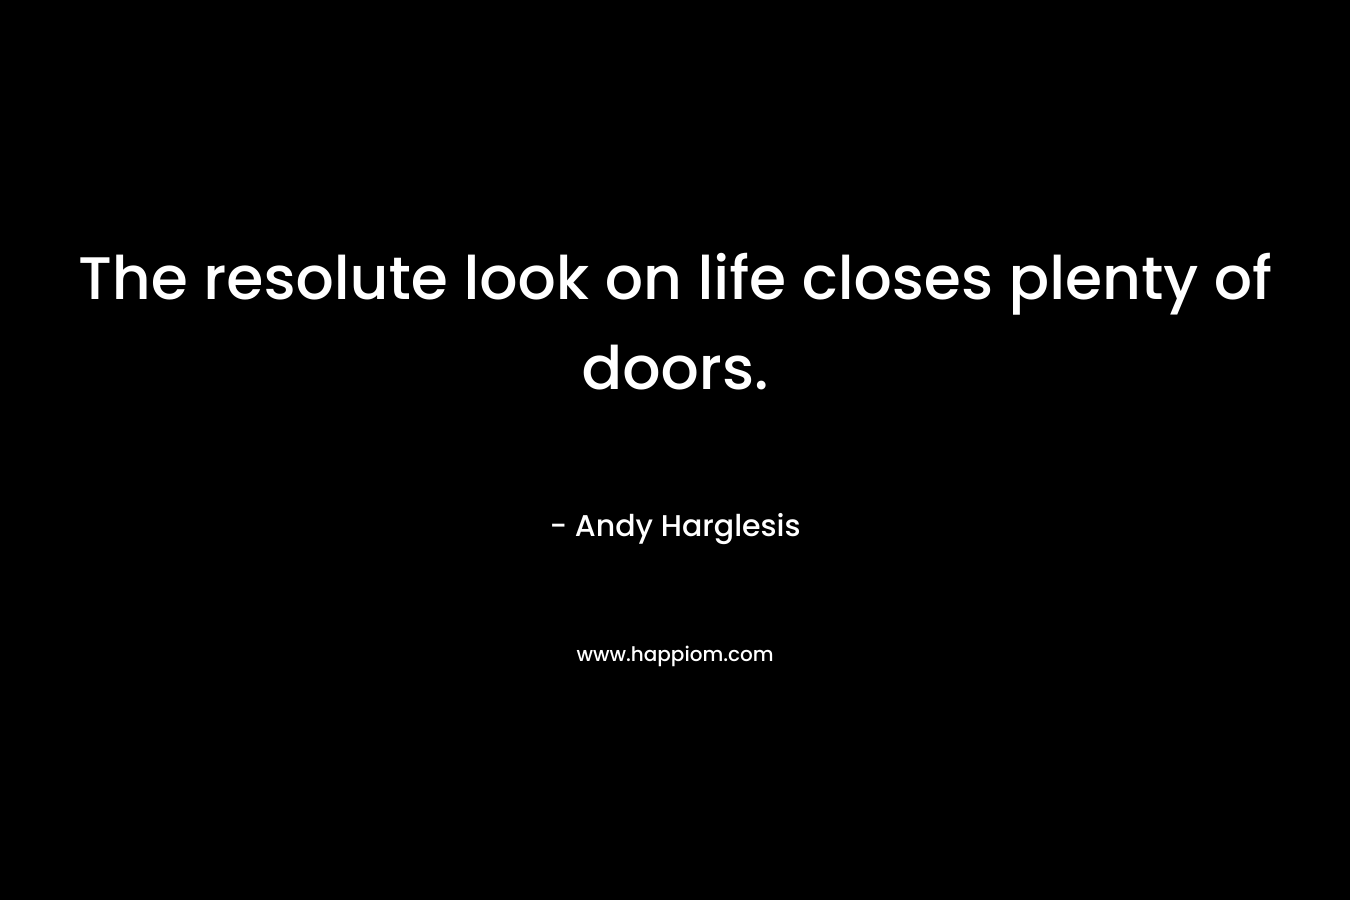 The resolute look on life closes plenty of doors. – Andy Harglesis